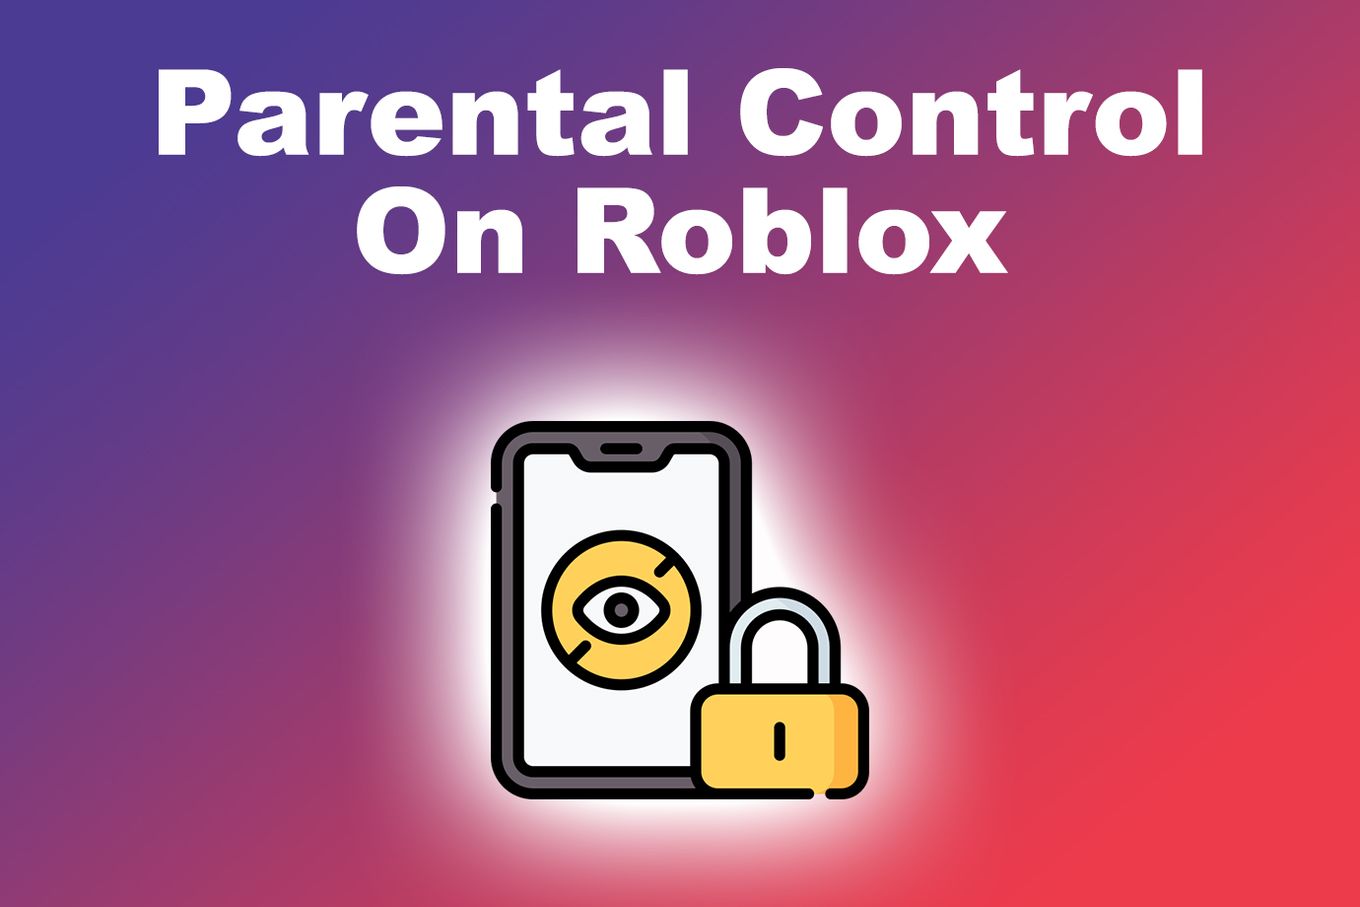 Roblox: Everything You Wanted To Know About The Parental Controls